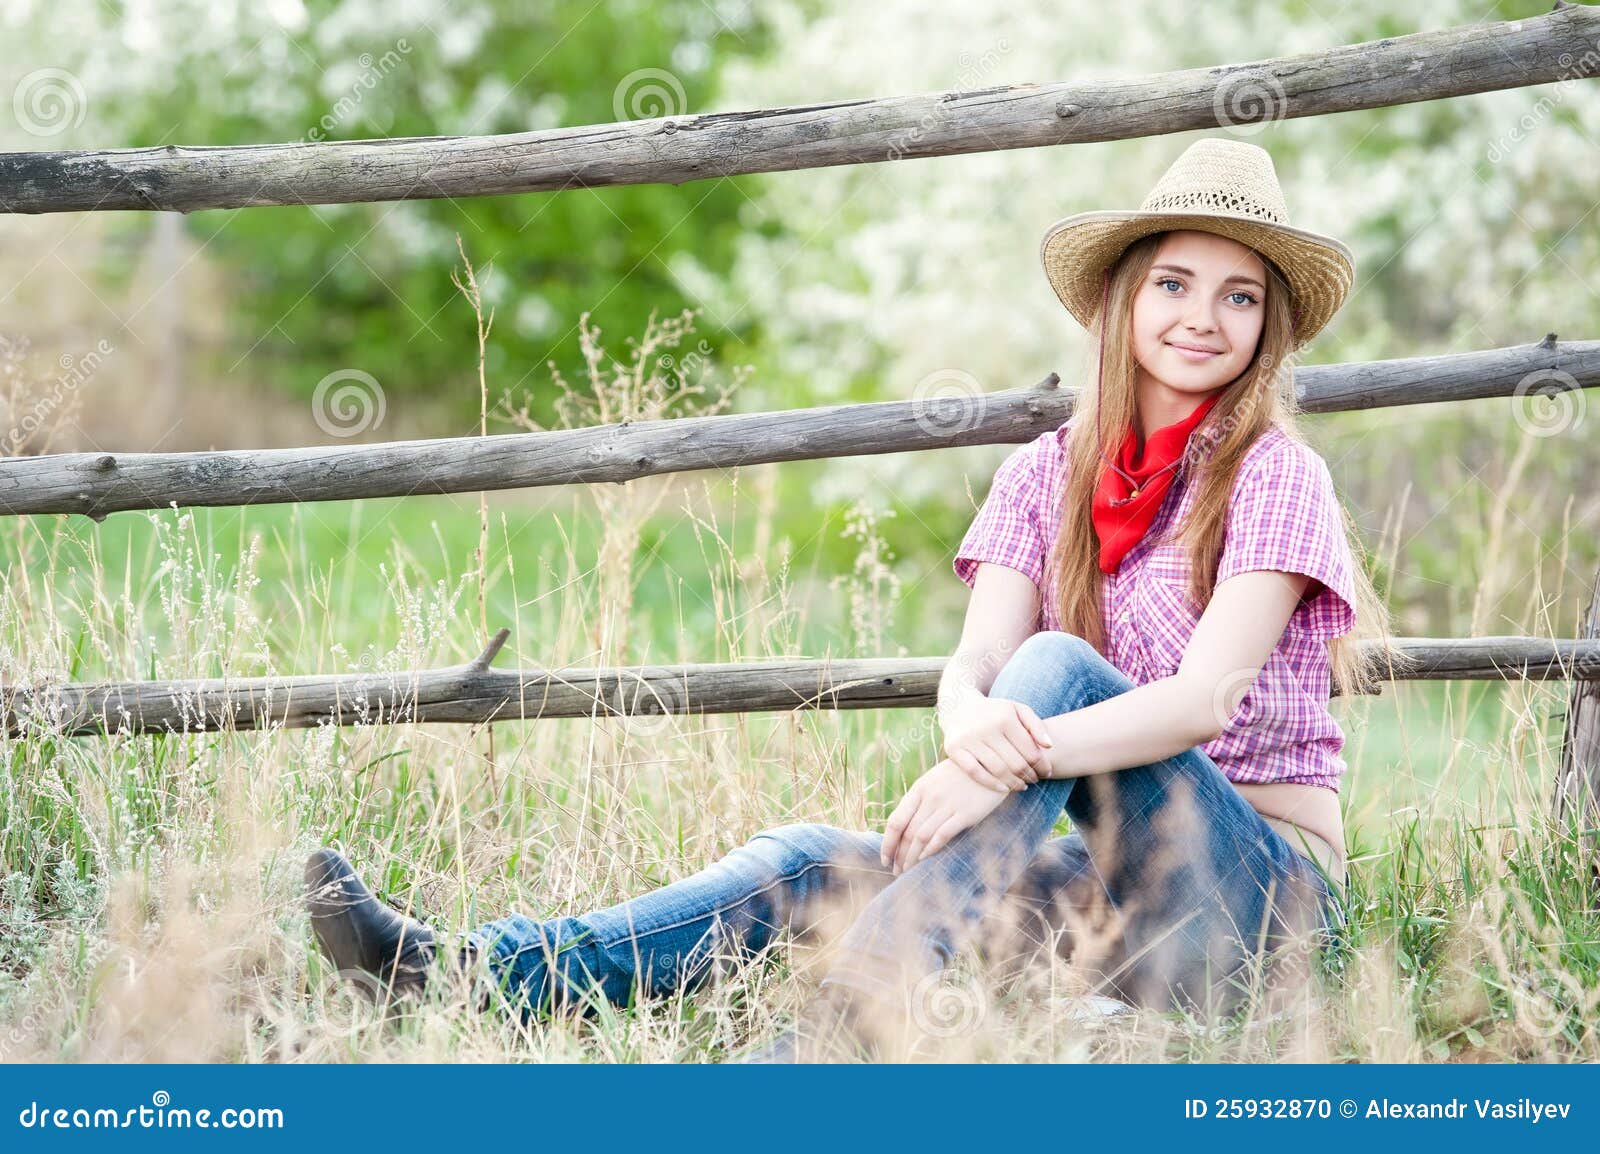 Portrait of the Girl - Cowboy at an Old Fence Stock Photo - Image of ...